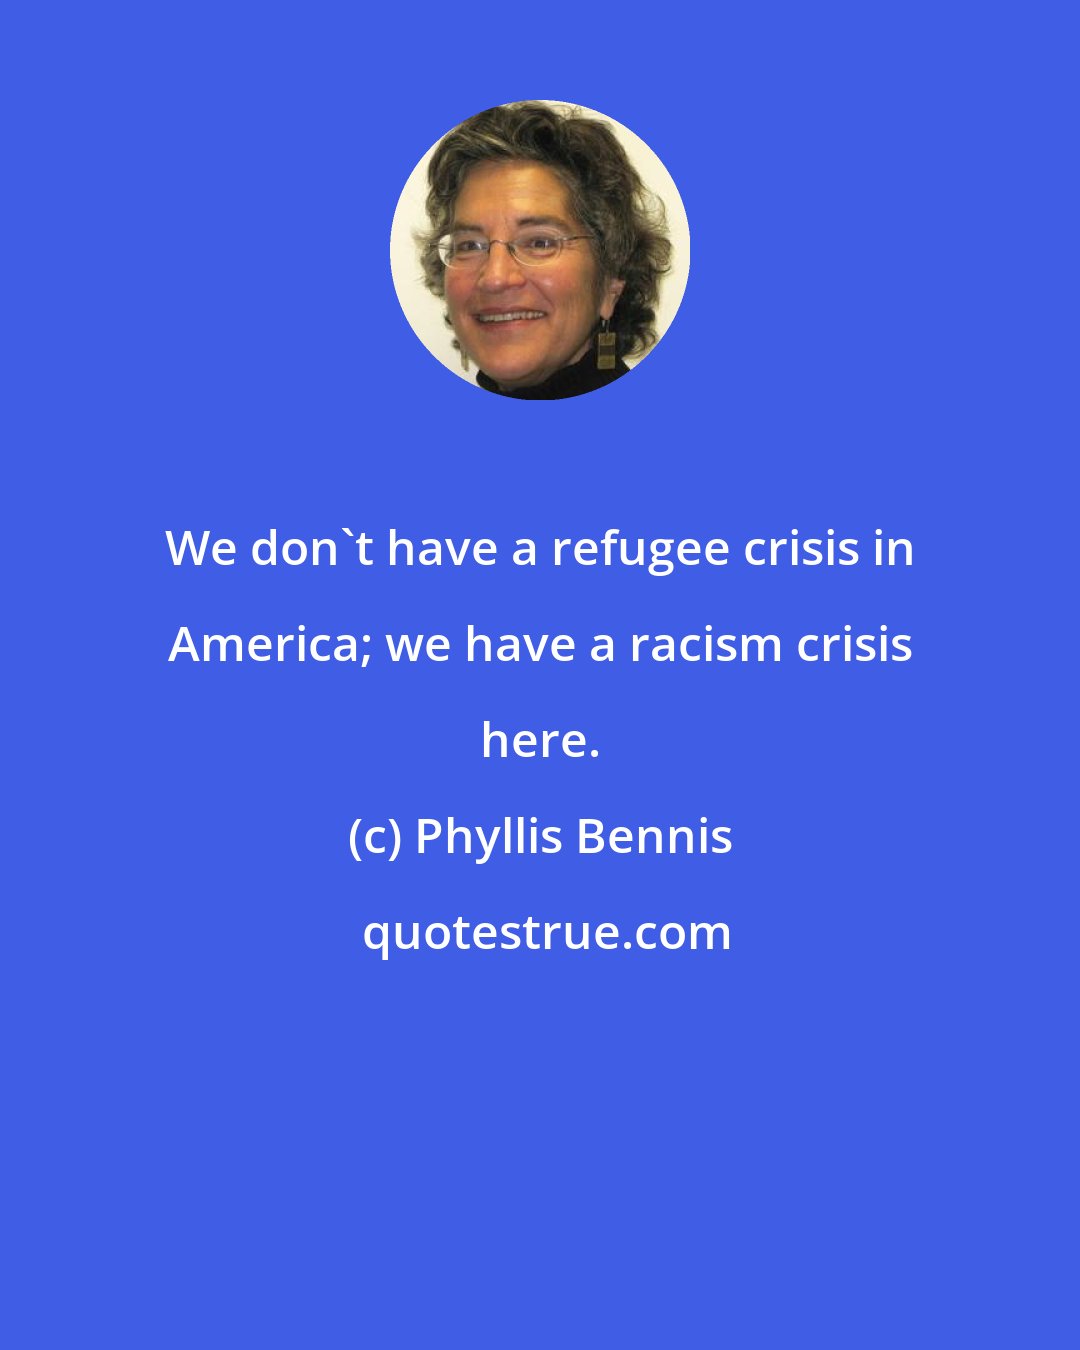 Phyllis Bennis: We don't have a refugee crisis in America; we have a racism crisis here.